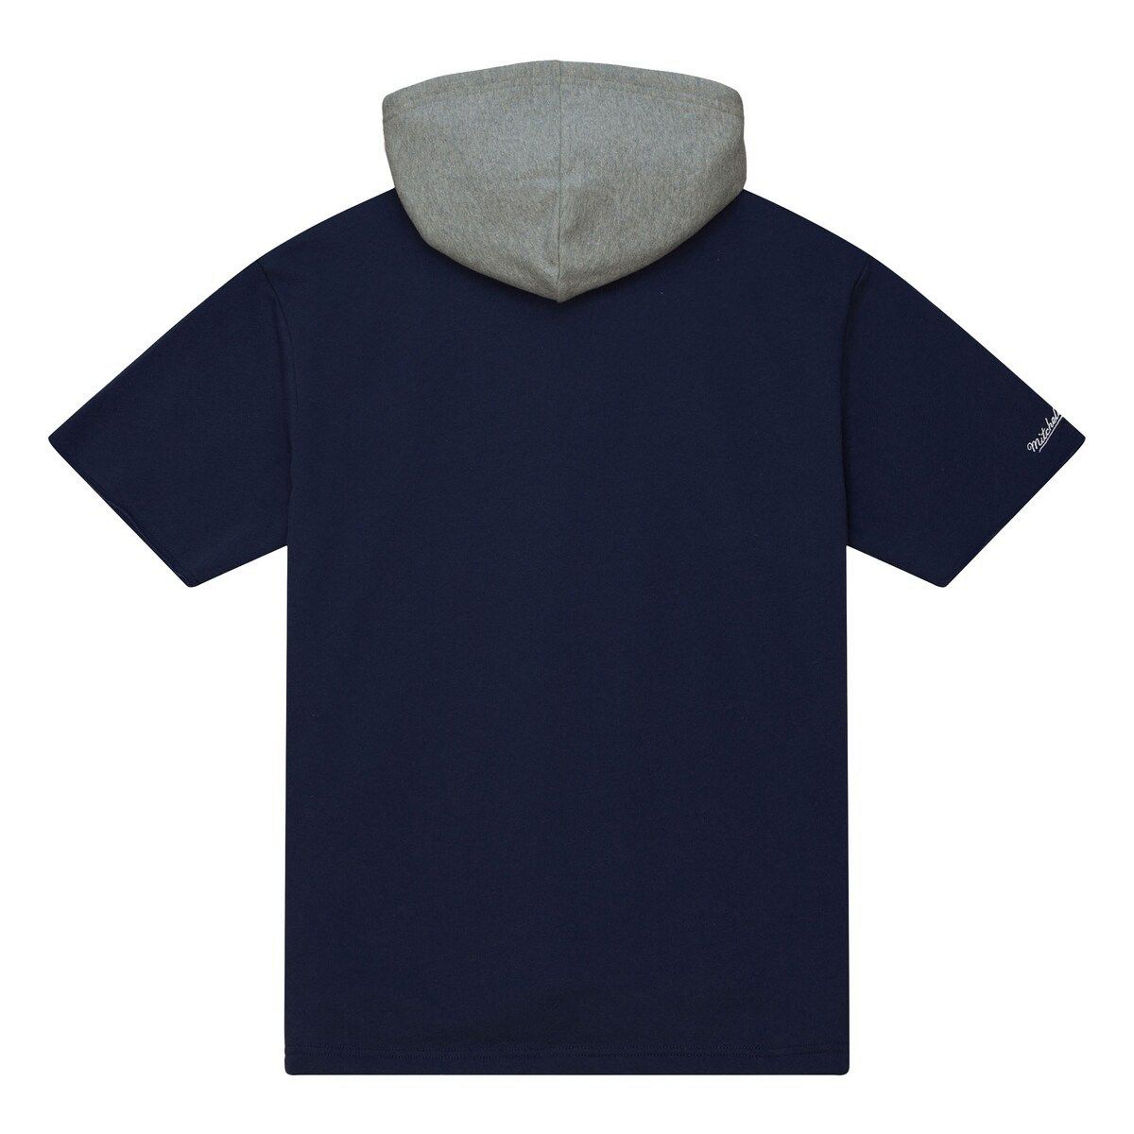 Mitchell & Ness Men's Navy Dallas Cowboys game Short Sleeve Hoodie - Image 4 of 4